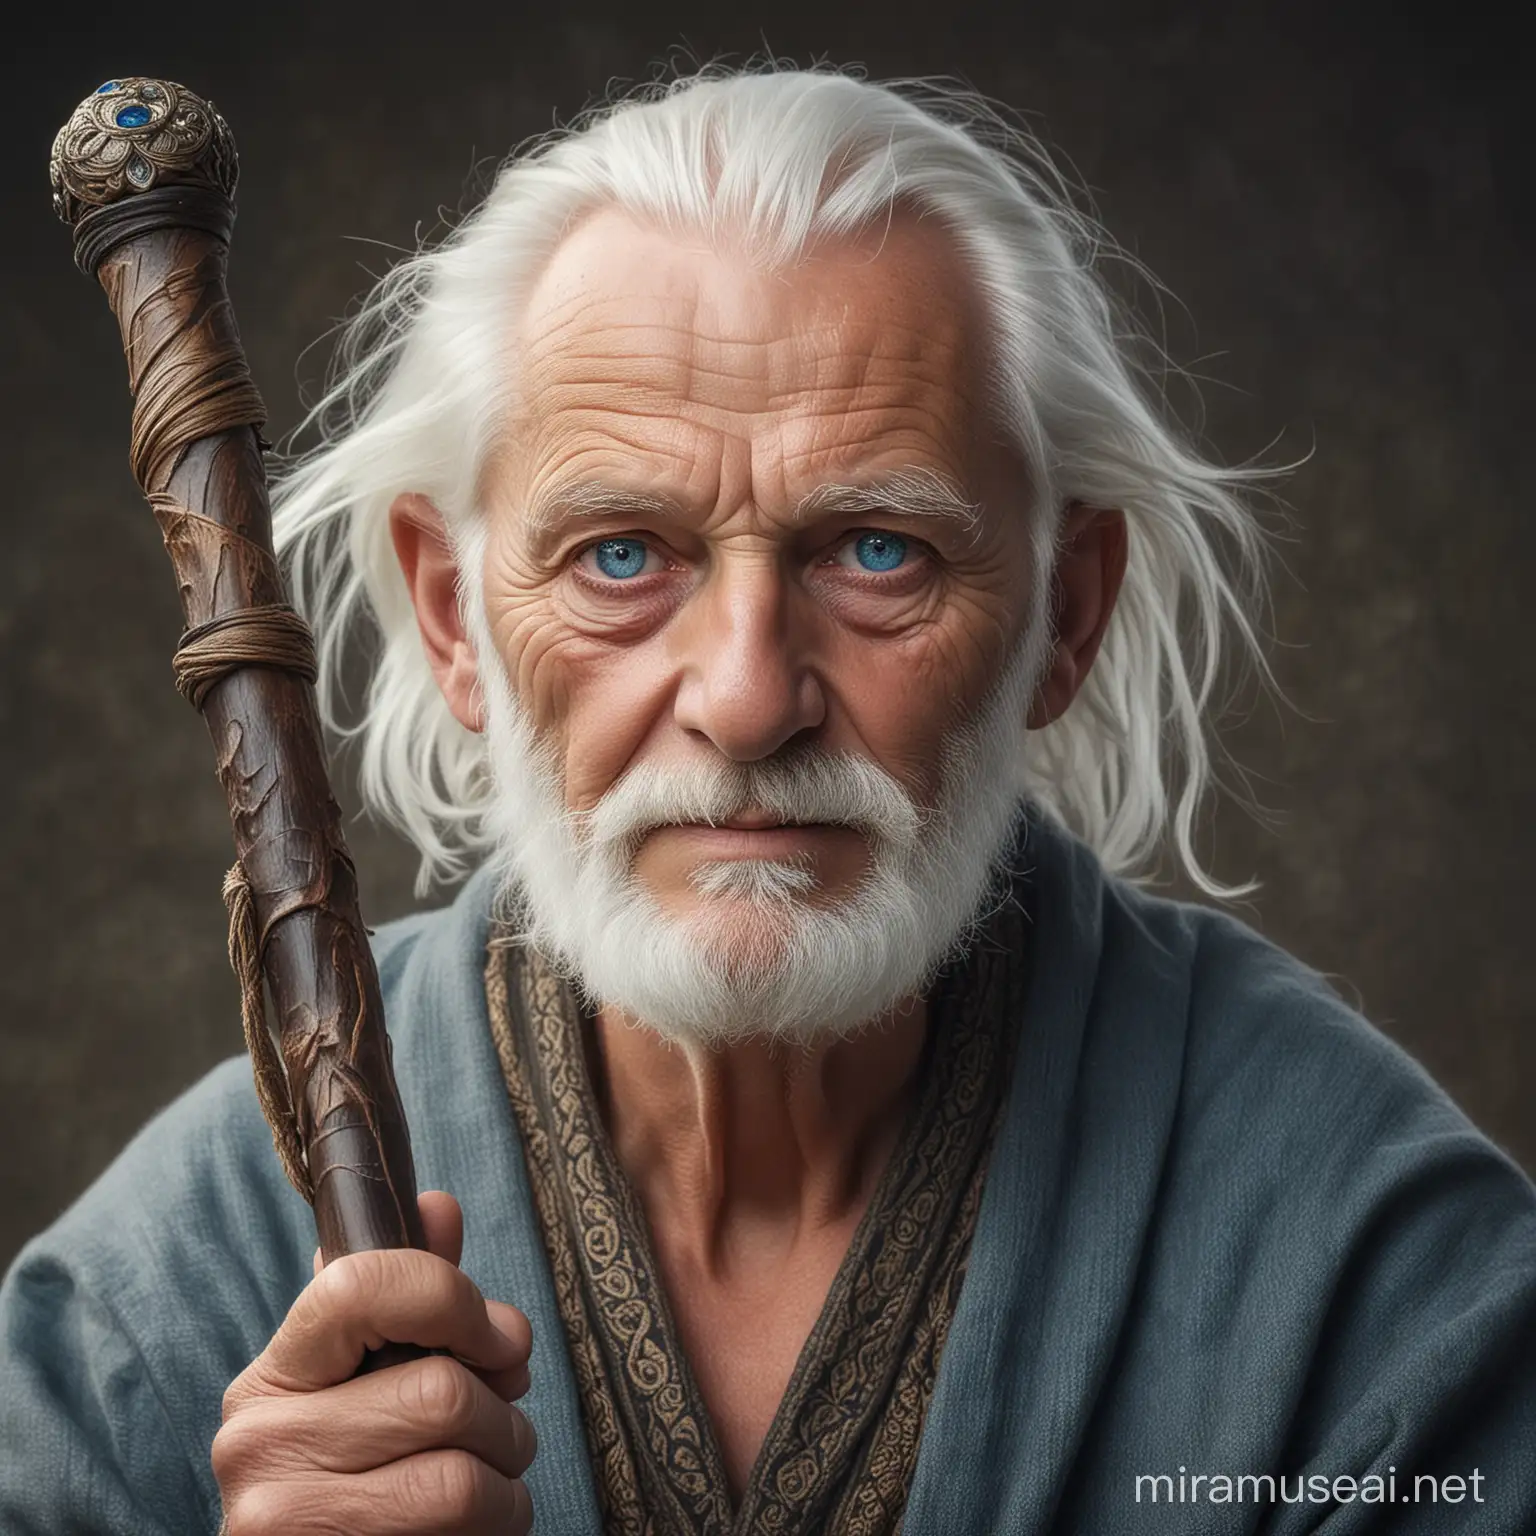 a kindly old man with sparkling blue eyes and white hair, holding a walking stick. He is the wise man of the community. 